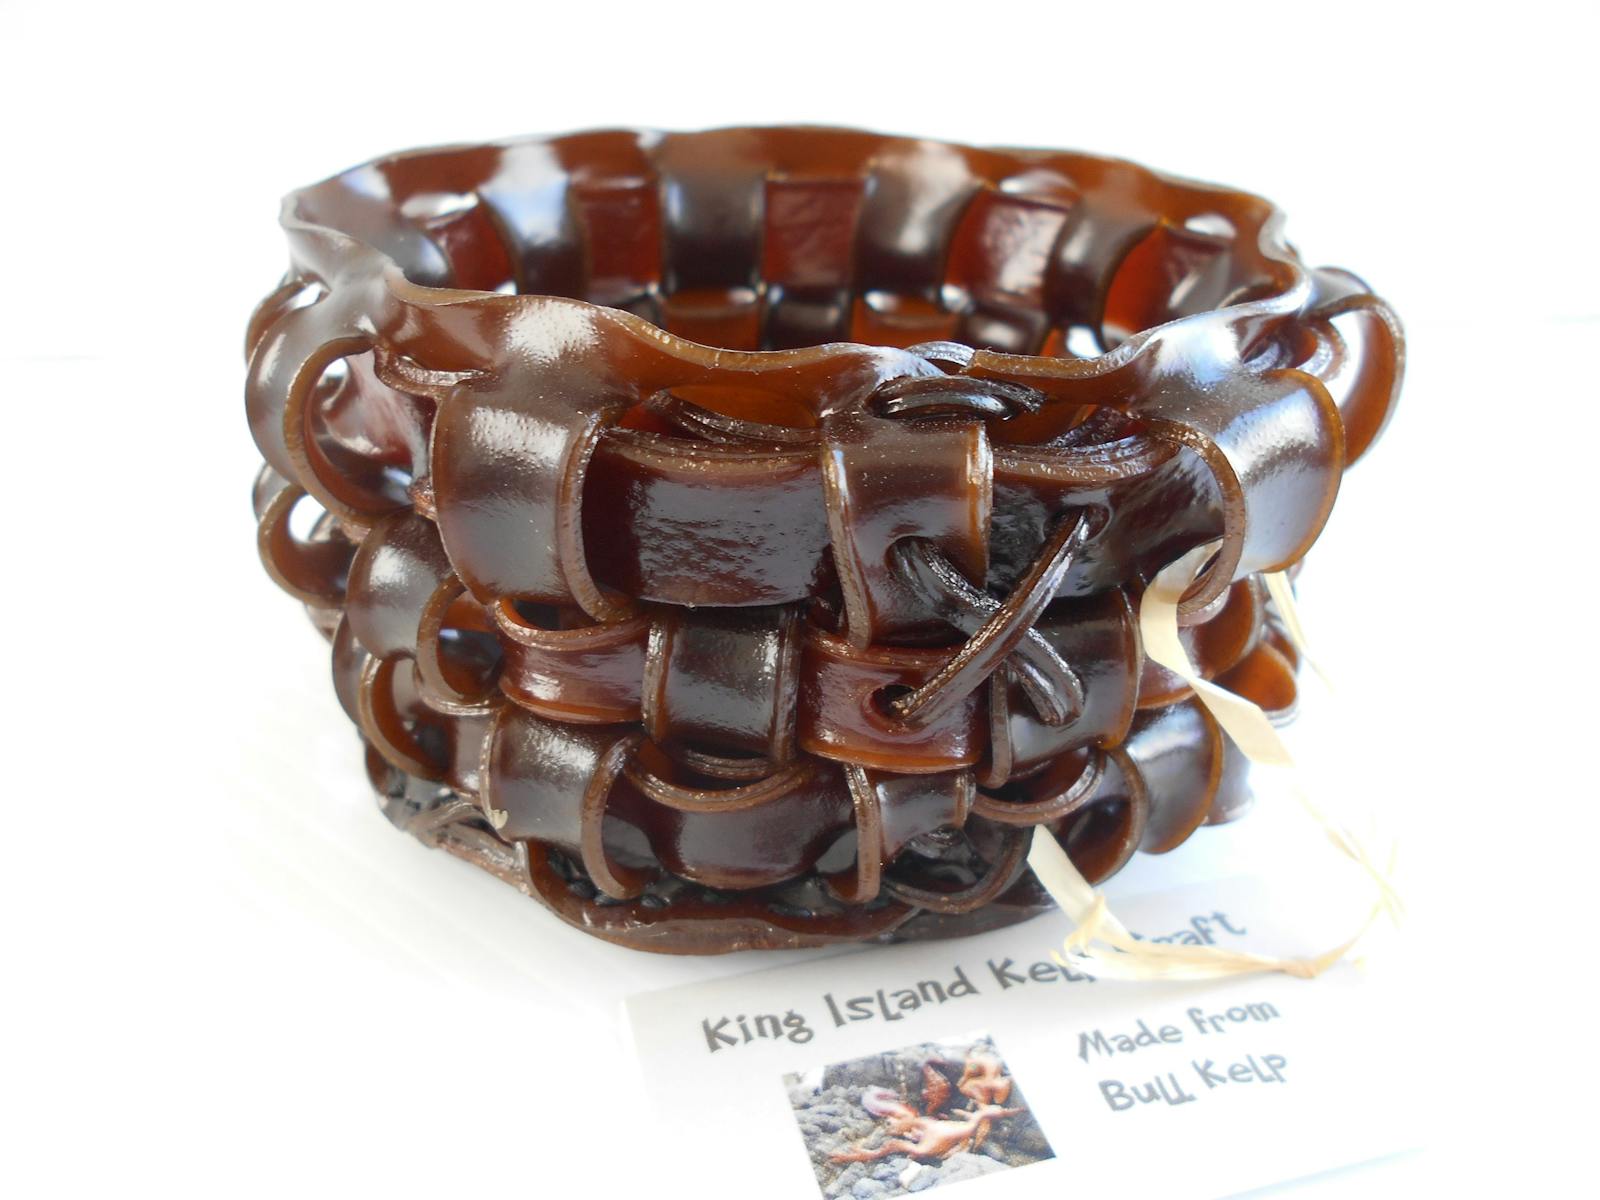 A weave bowl made from Bull Kelp.